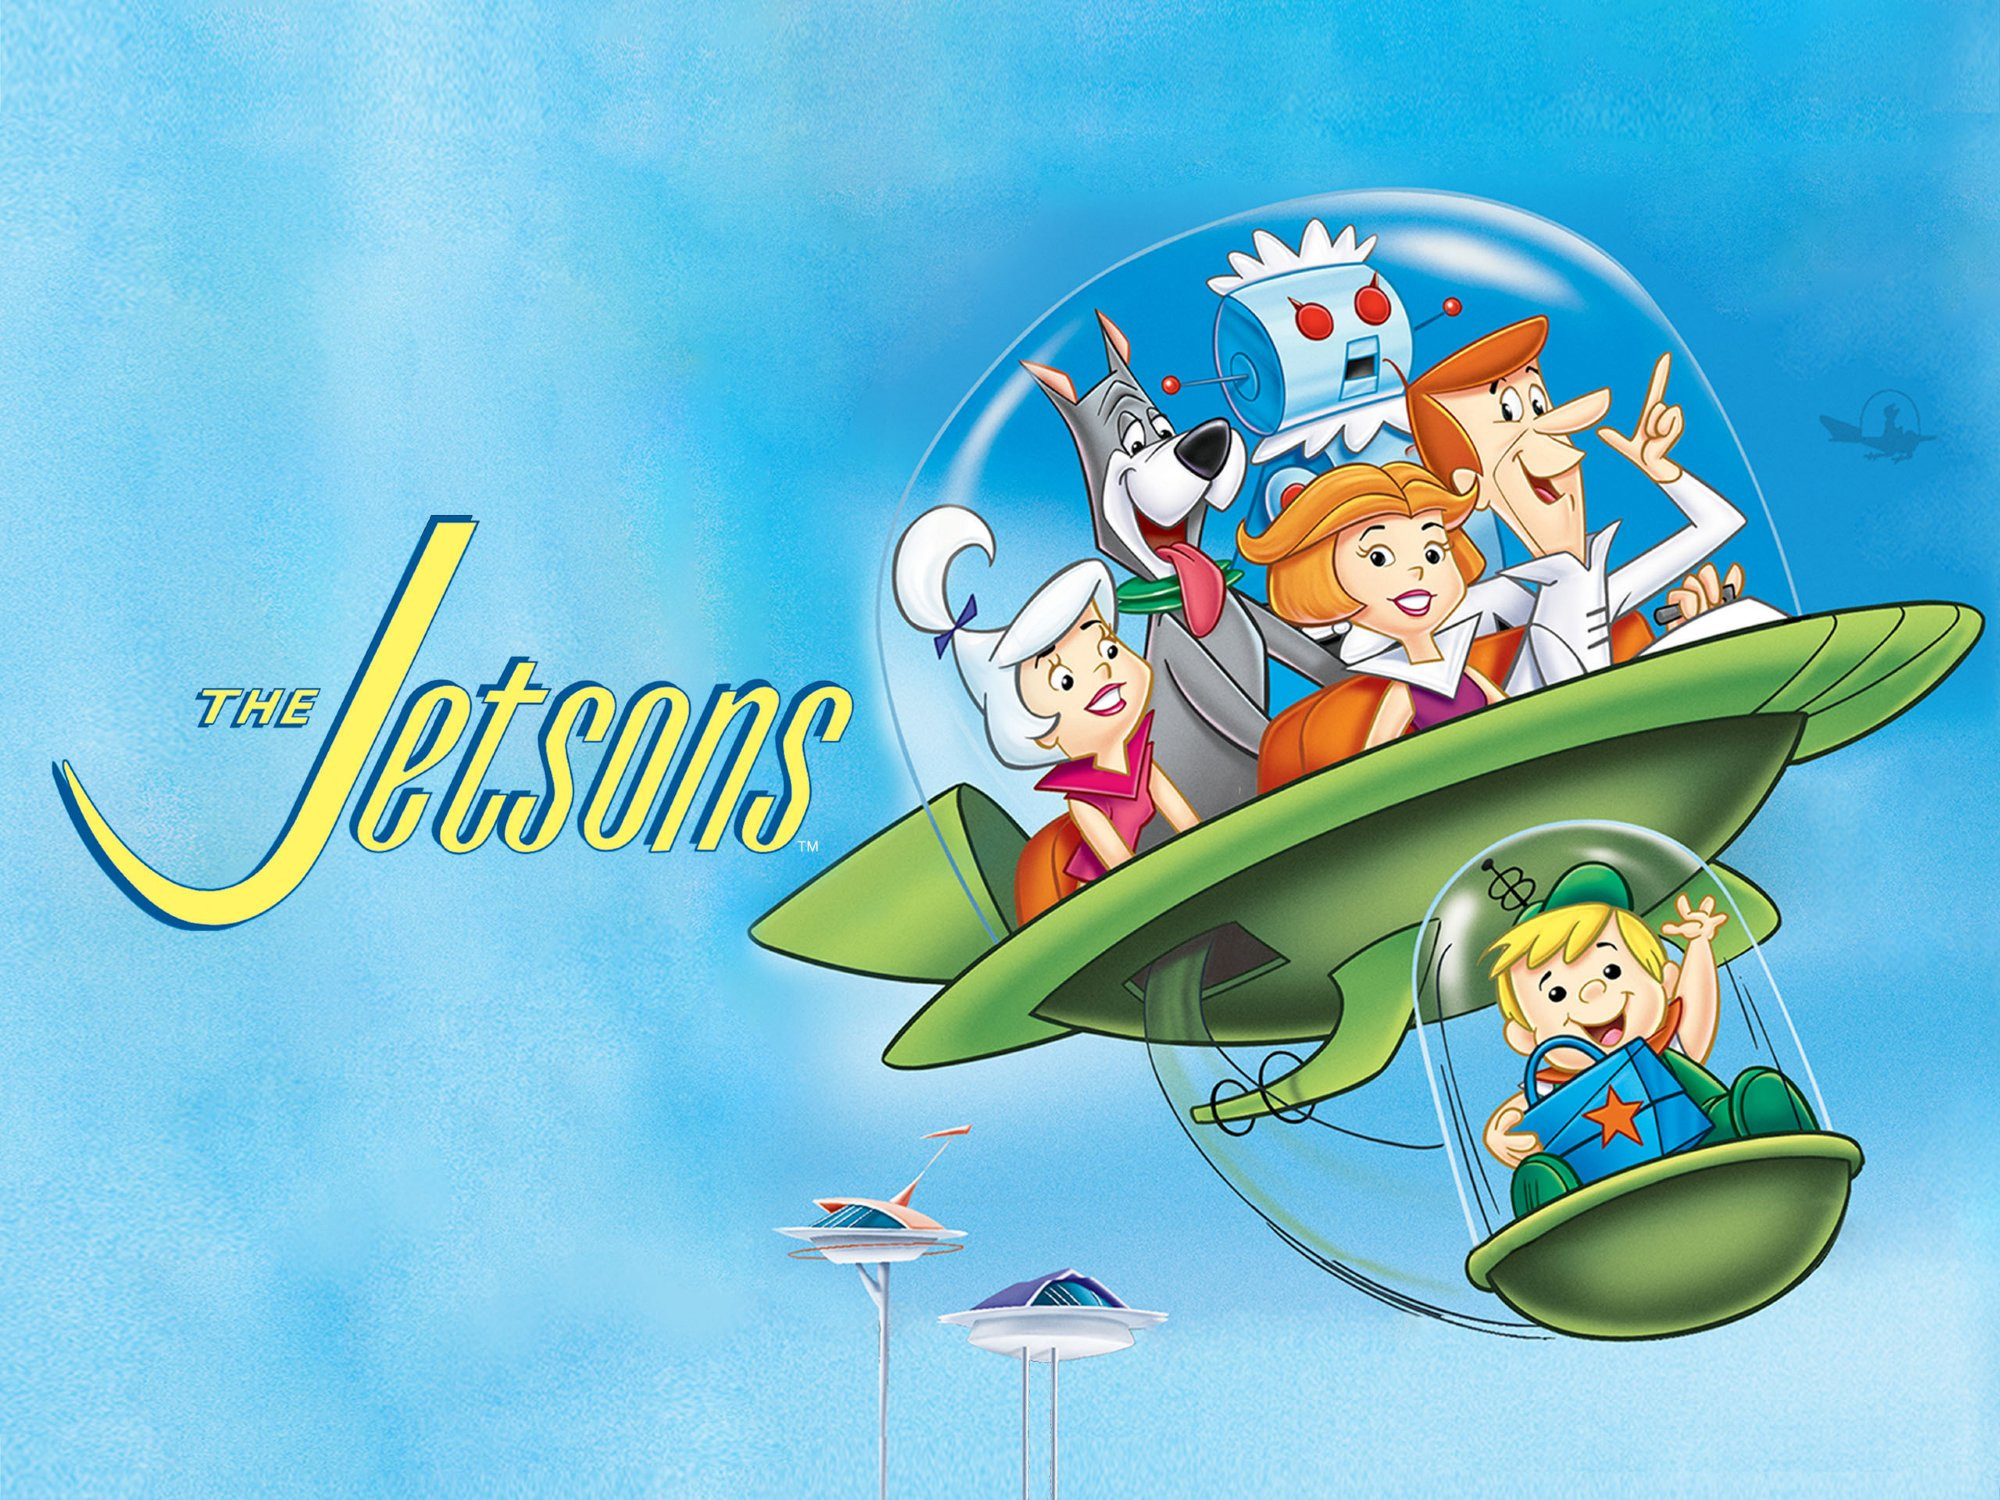 The jetsons Photo: The Jetsons.